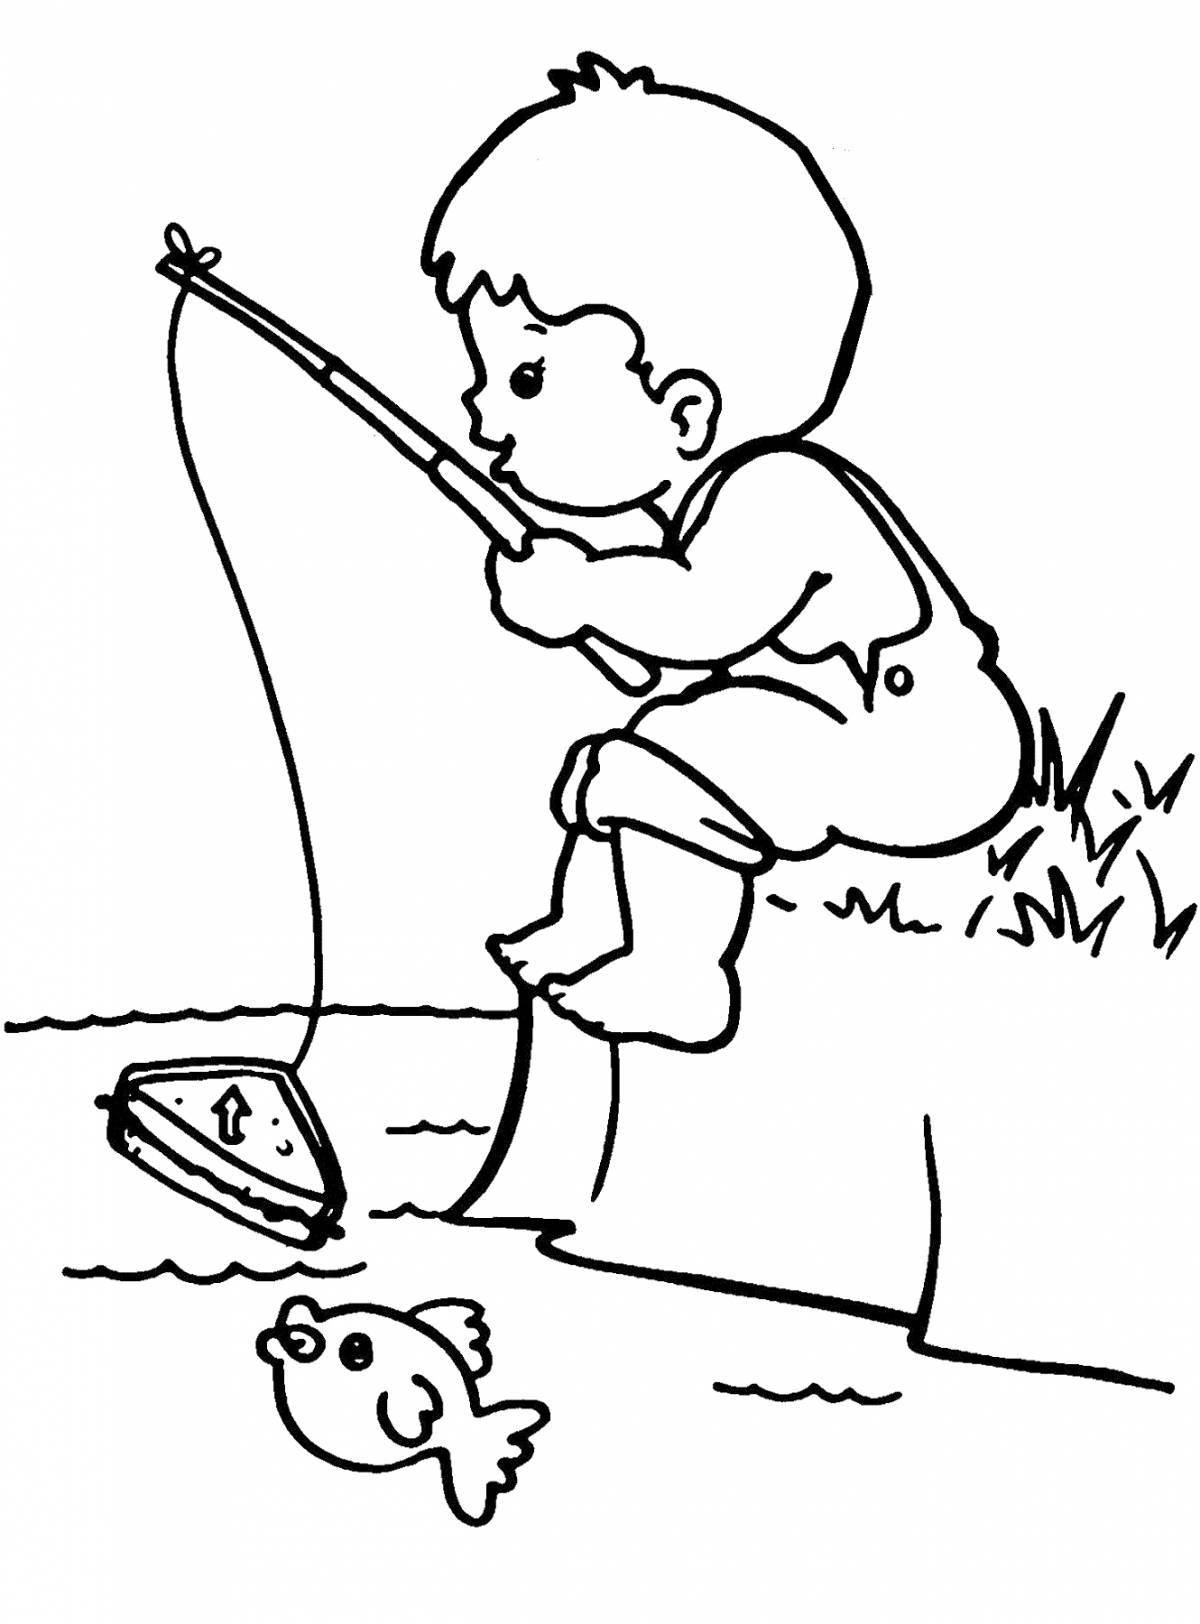 Live fishing rod coloring for kids